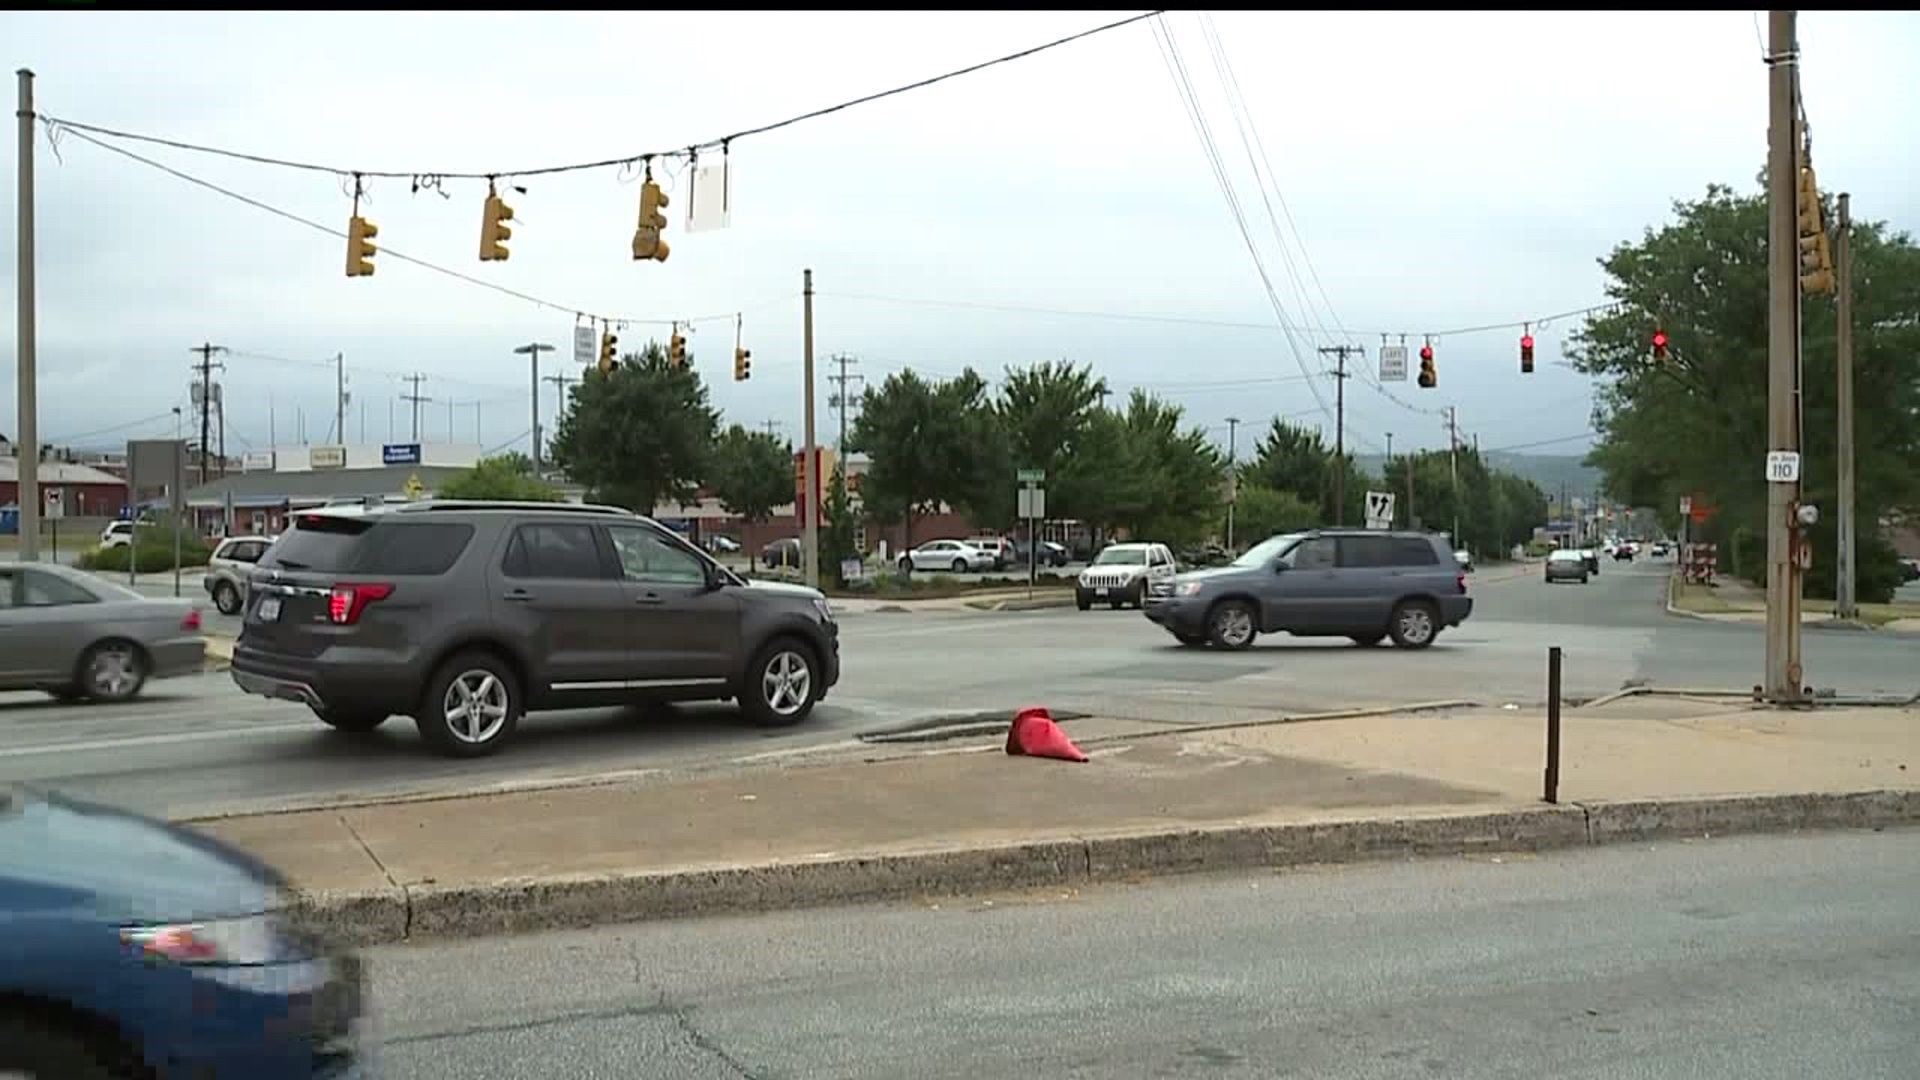 Traffic signal upgrades coming to York Co.